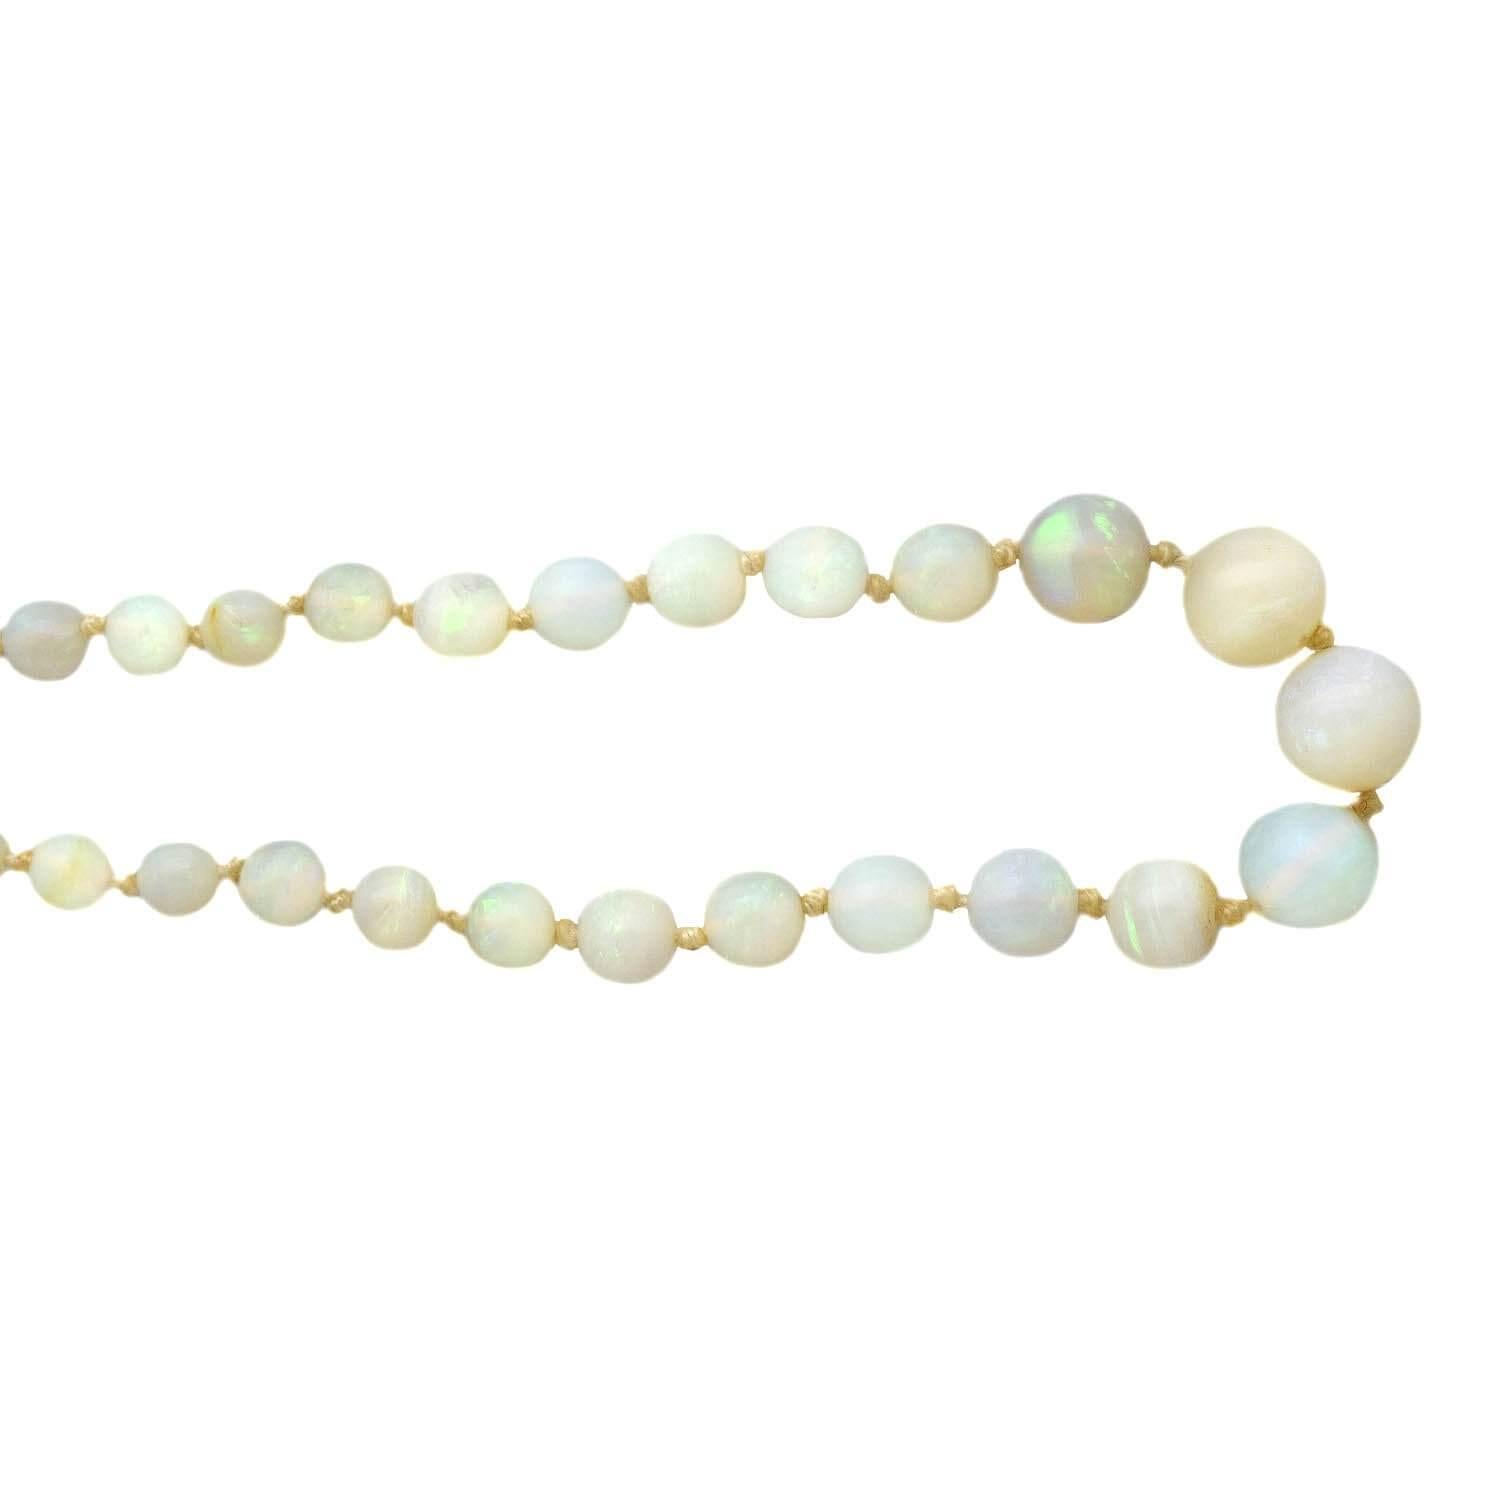 A lovely white opal necklace from the Art Deco (ca1930s) era! Graduated white opals flash a wonderful rainbow of color, knotted between white silk cord. The beads are translucent and their nearly-neon hues truly glow from within. The necklace is